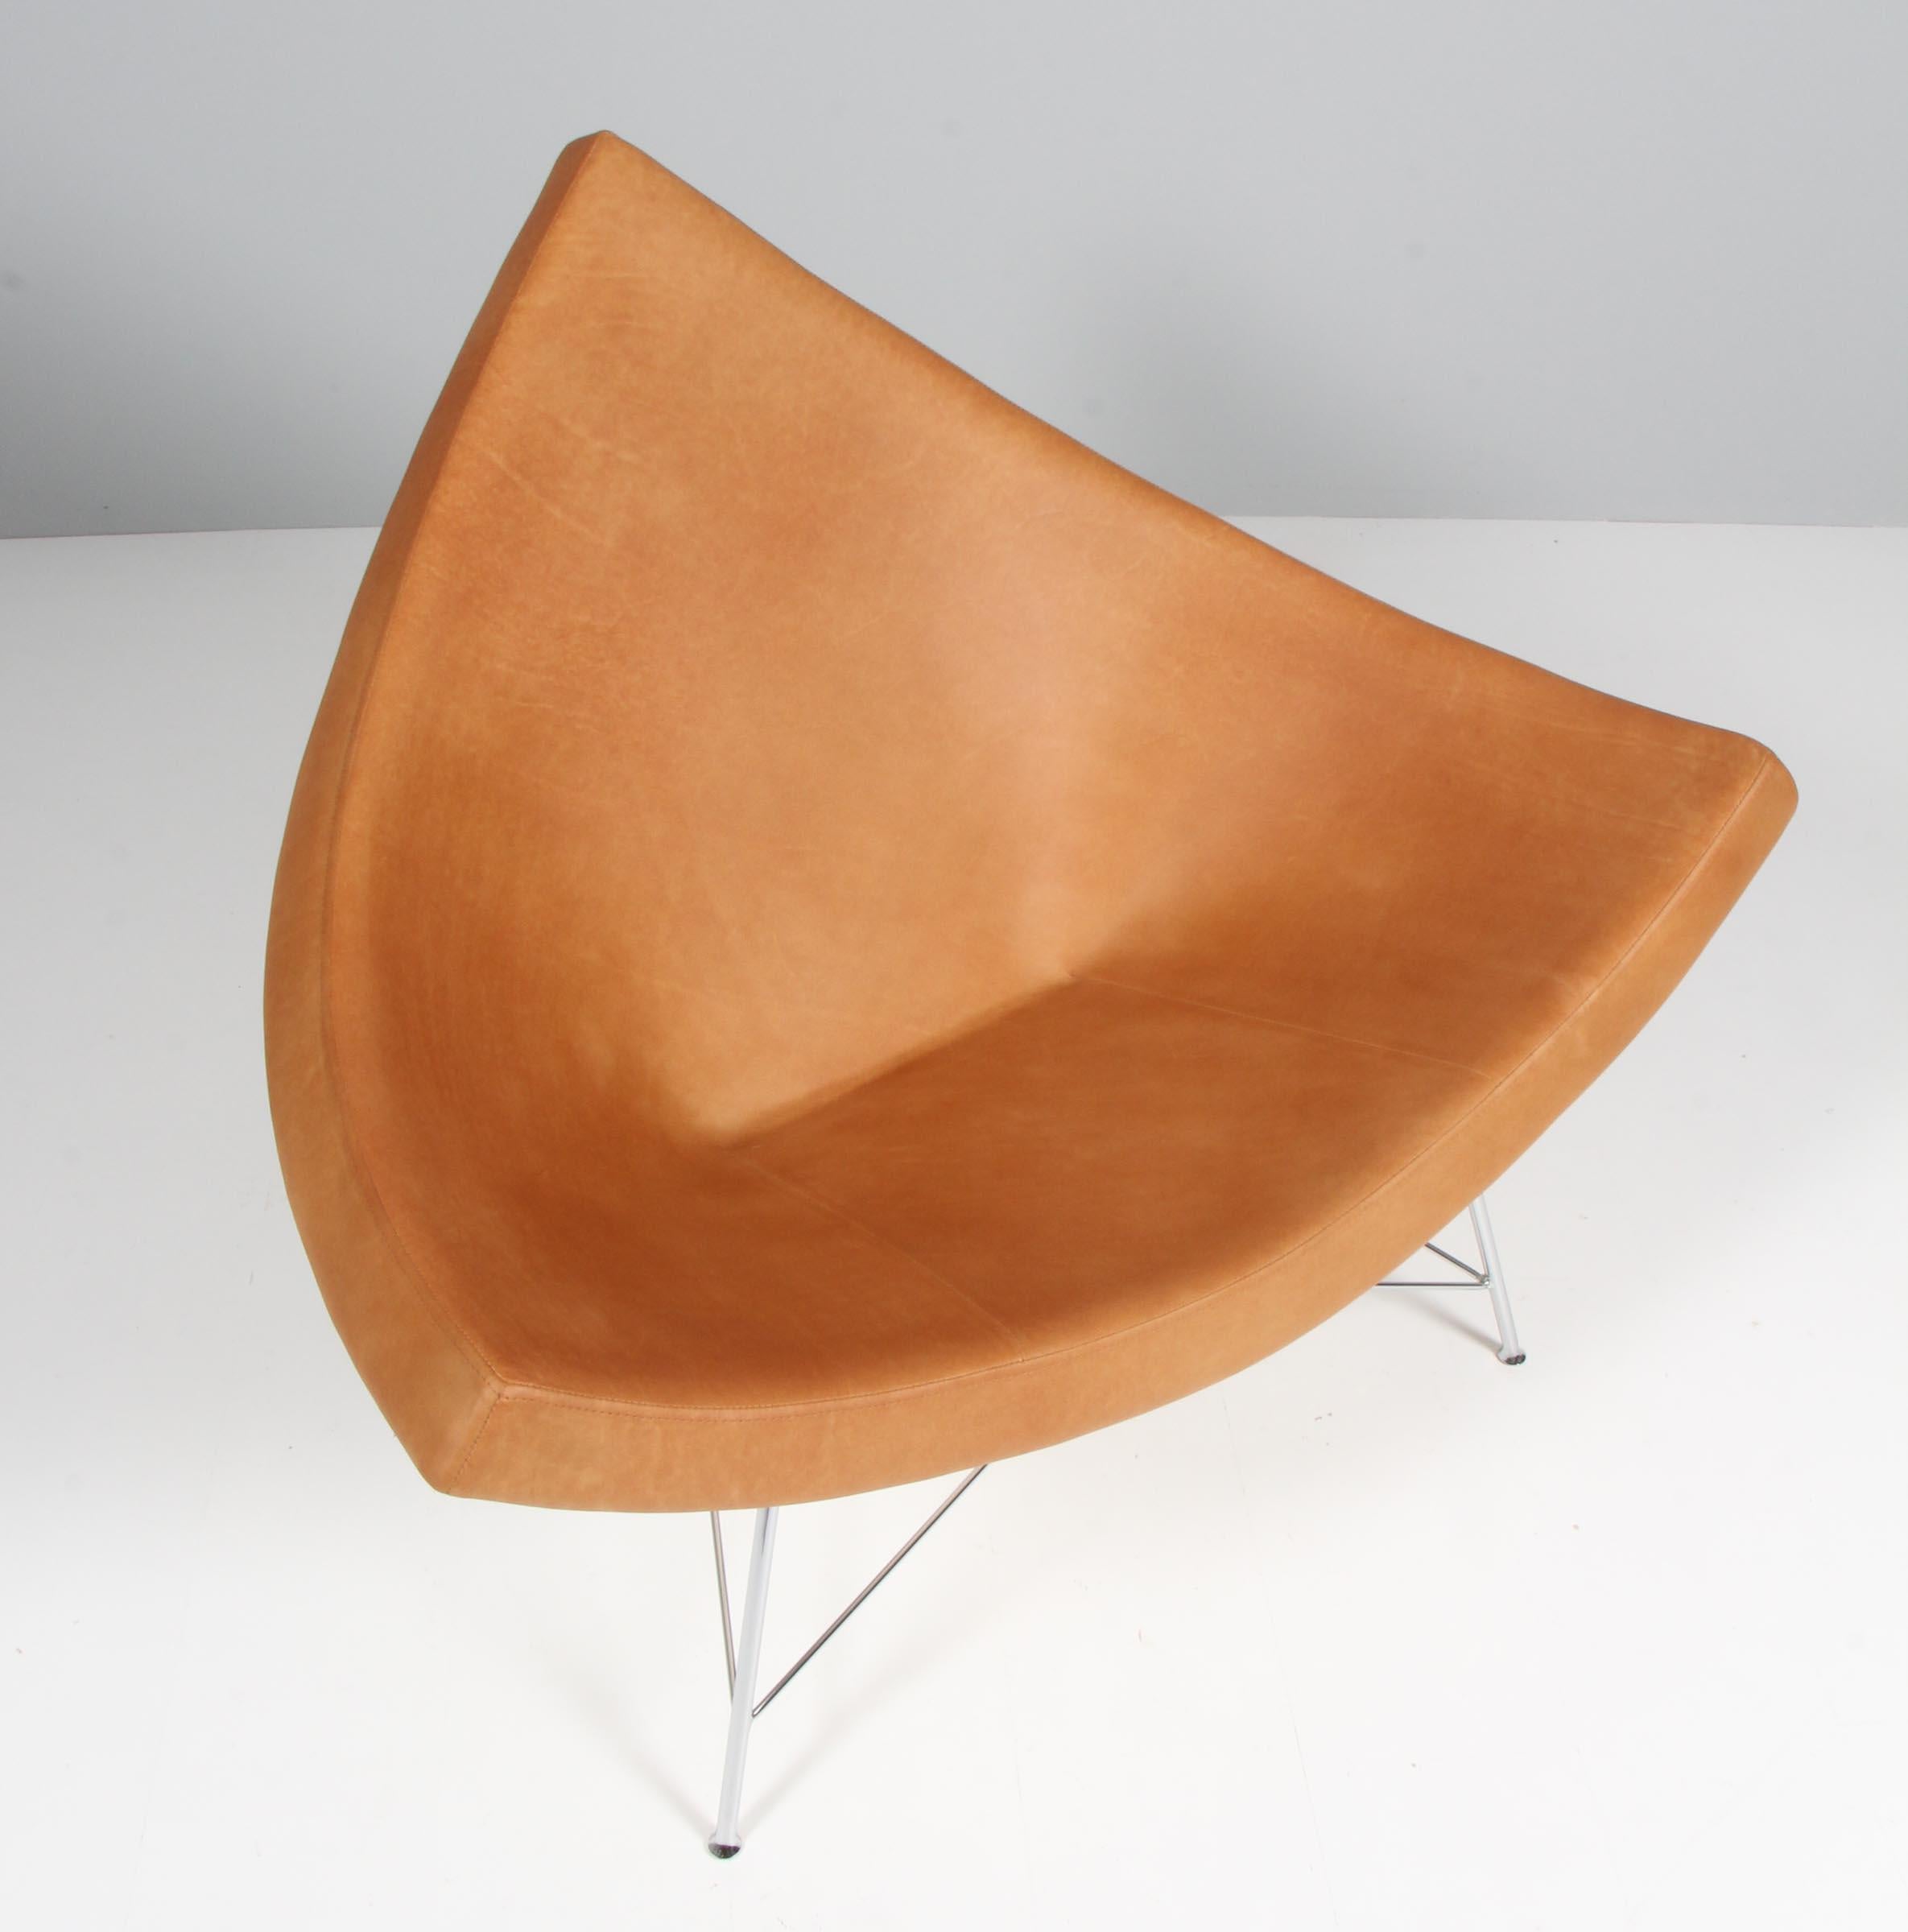 Coconut lounge chair designed by George Nelson for Herman Miller, manufactured by Vitra. new upholstered with vintage cognac aniline leather, white shell and chrome legs.